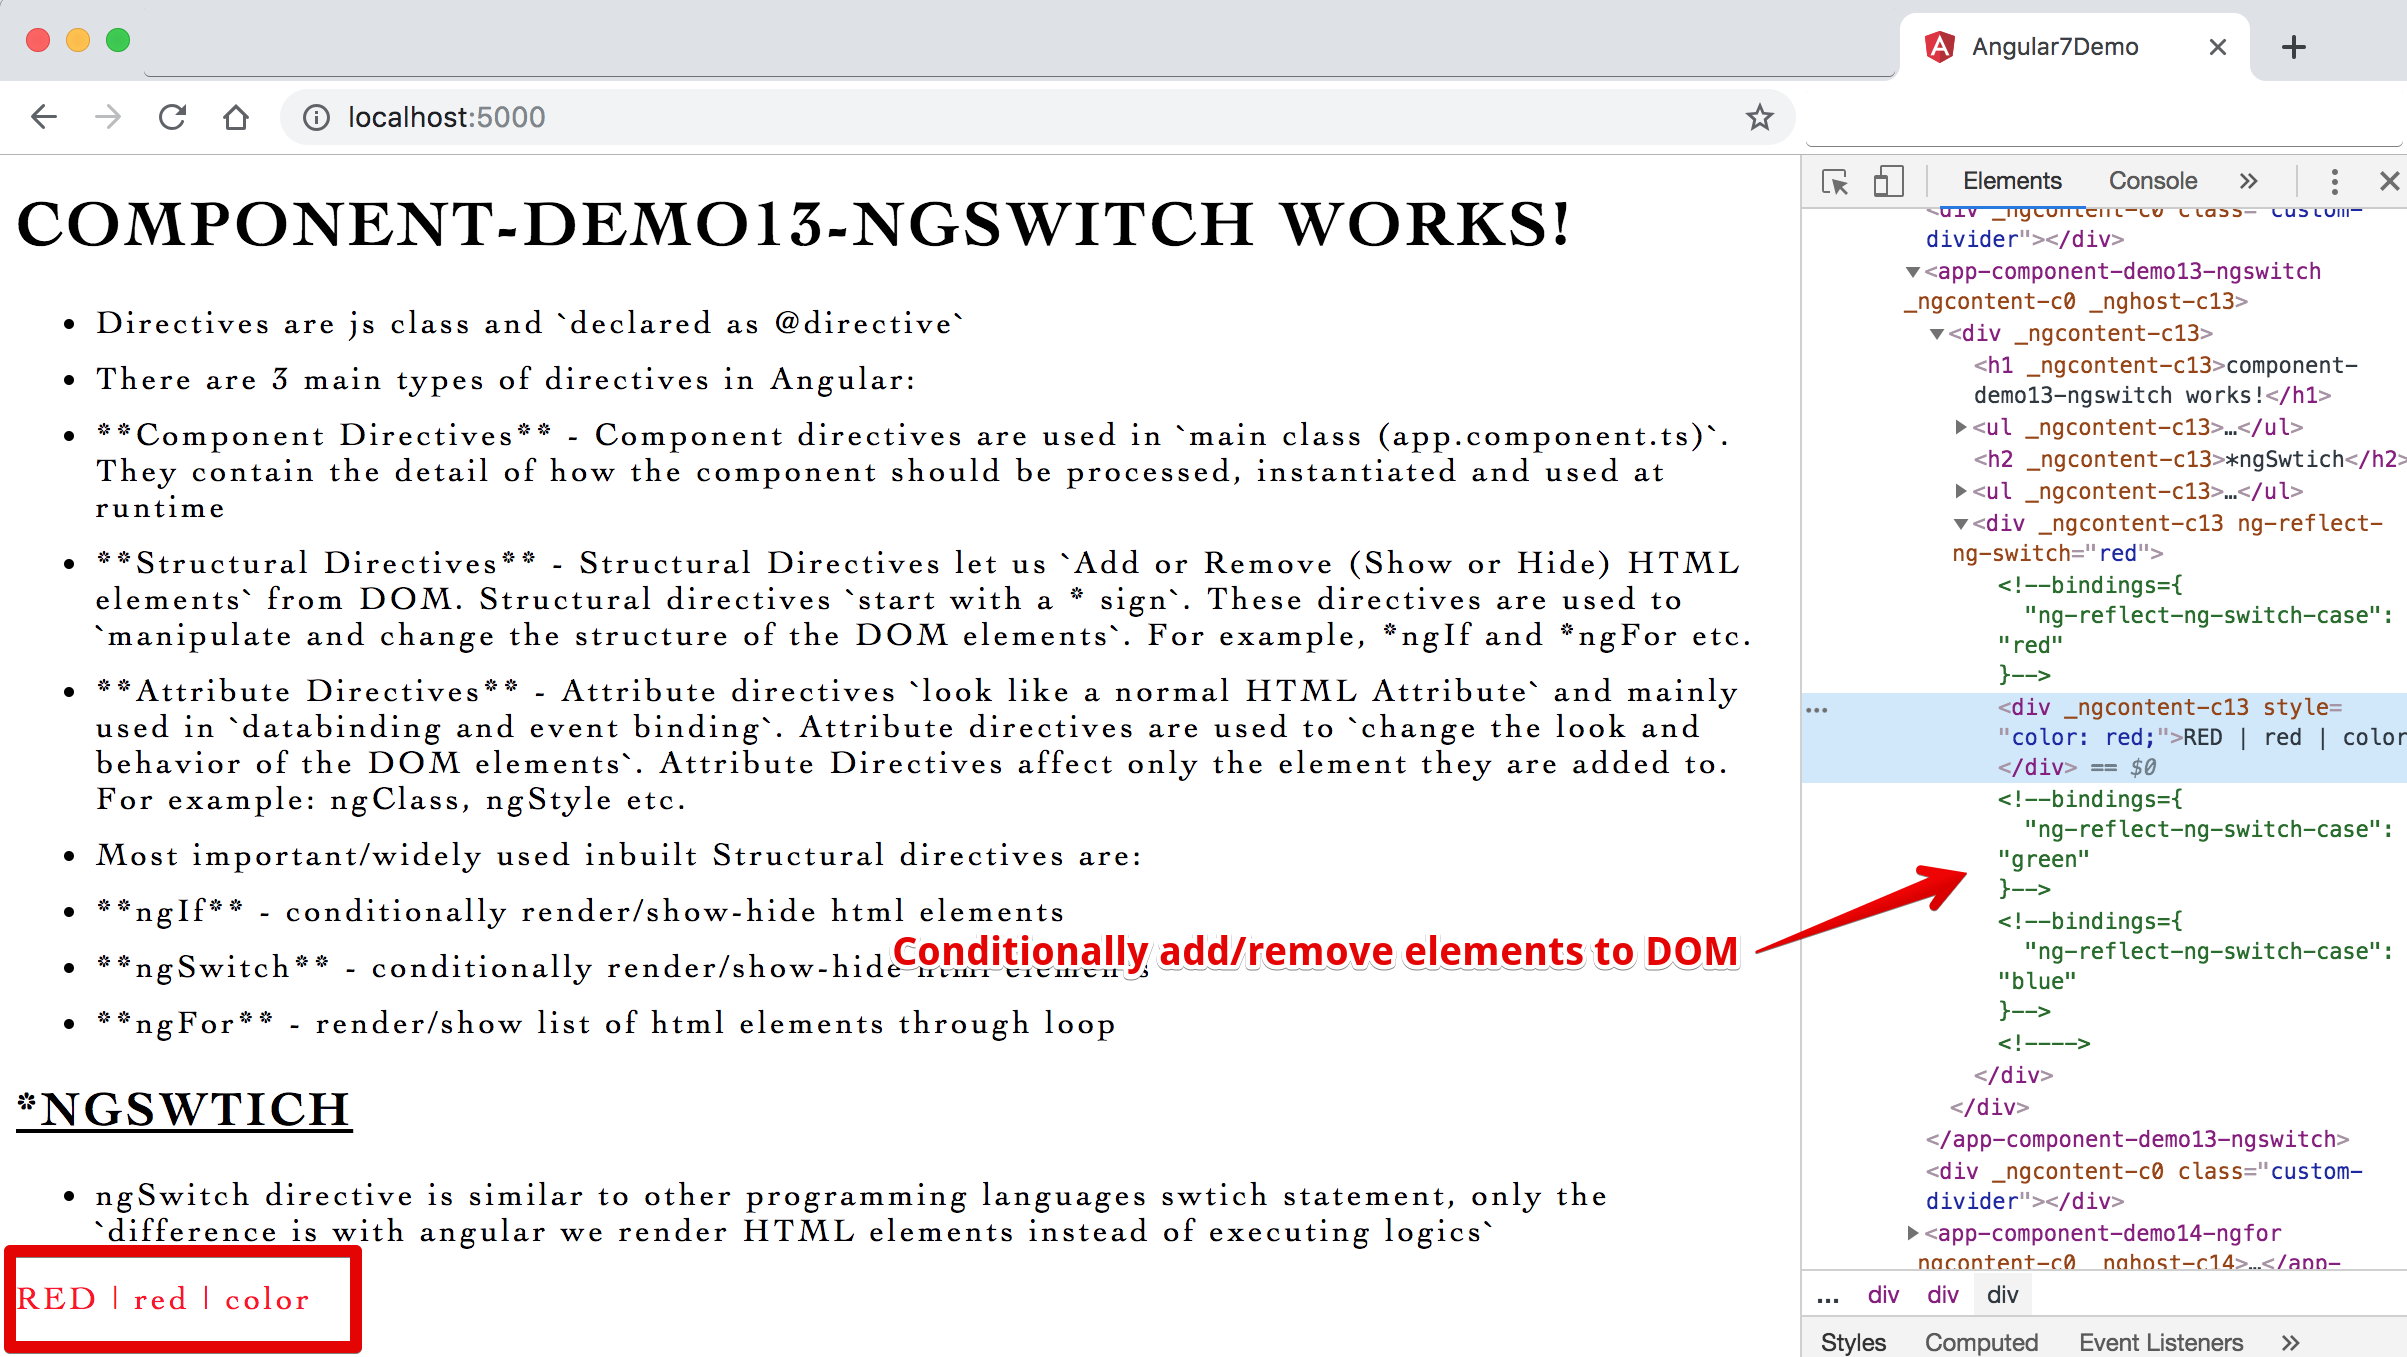 Image - Output - *ngSwitch - Structural directive to control/add/remove elements to DOM conditionally